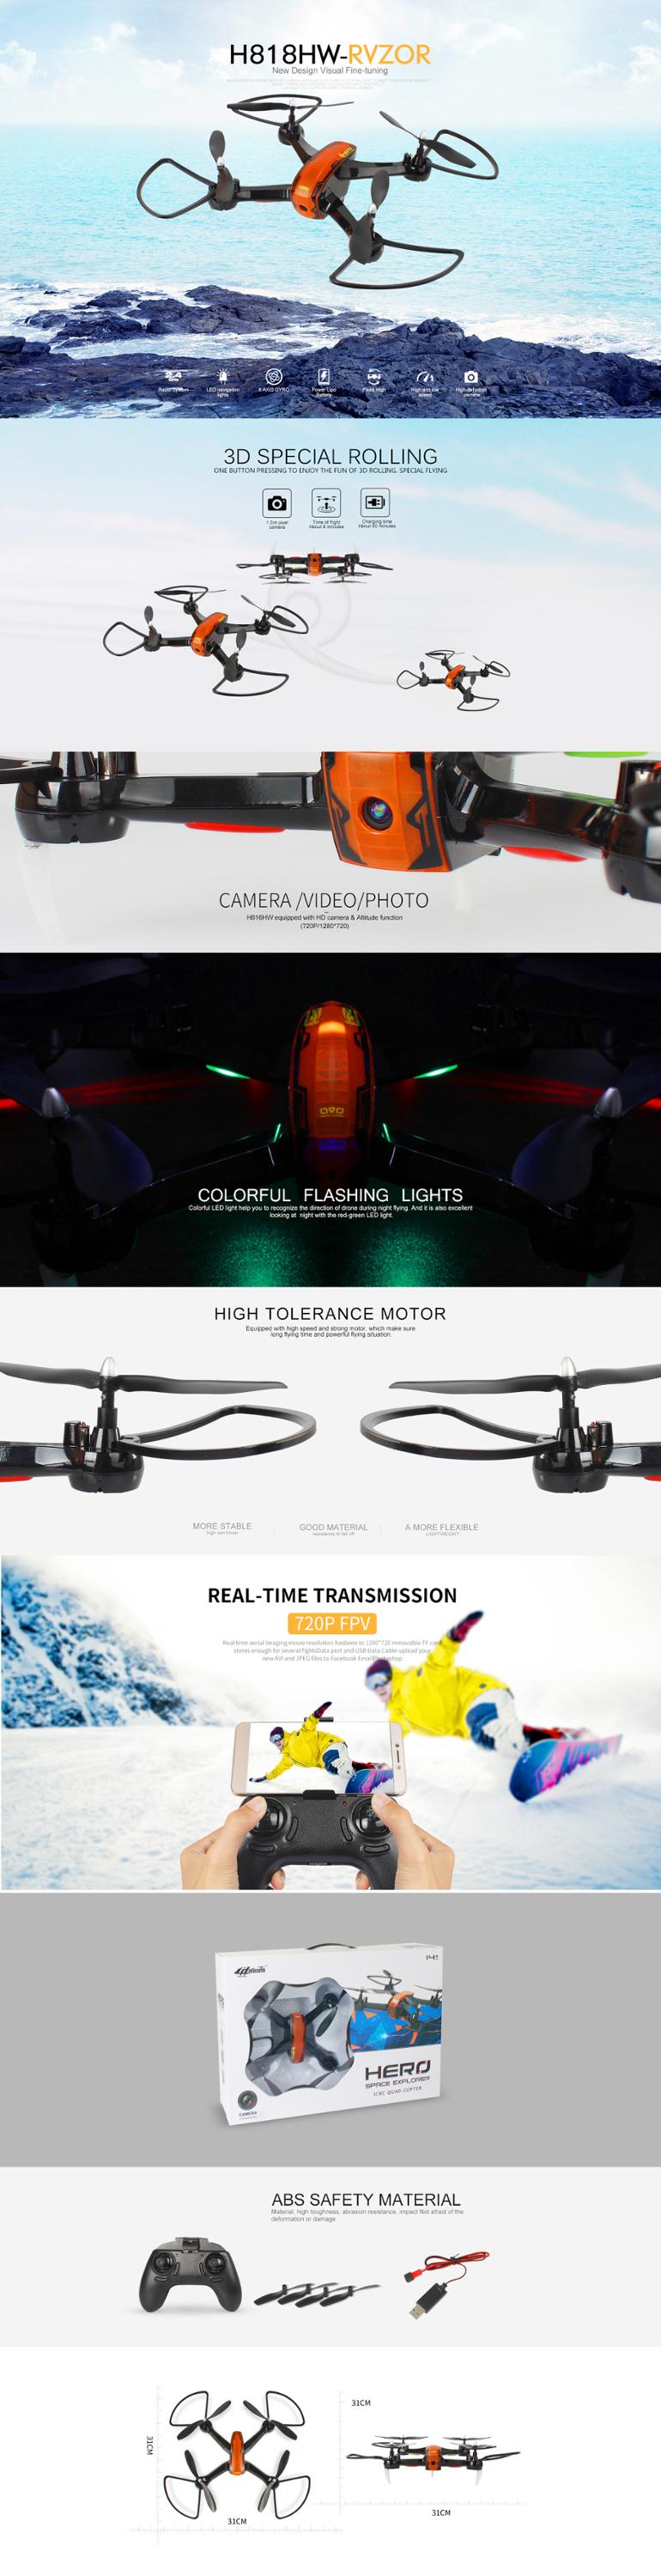 Beauty Rc Drone Hover Camera Aircraft Ultralight Helicopters for Sale 720P Wifi Camera R/C Drone Helicute 10 Minutes 100 Meters